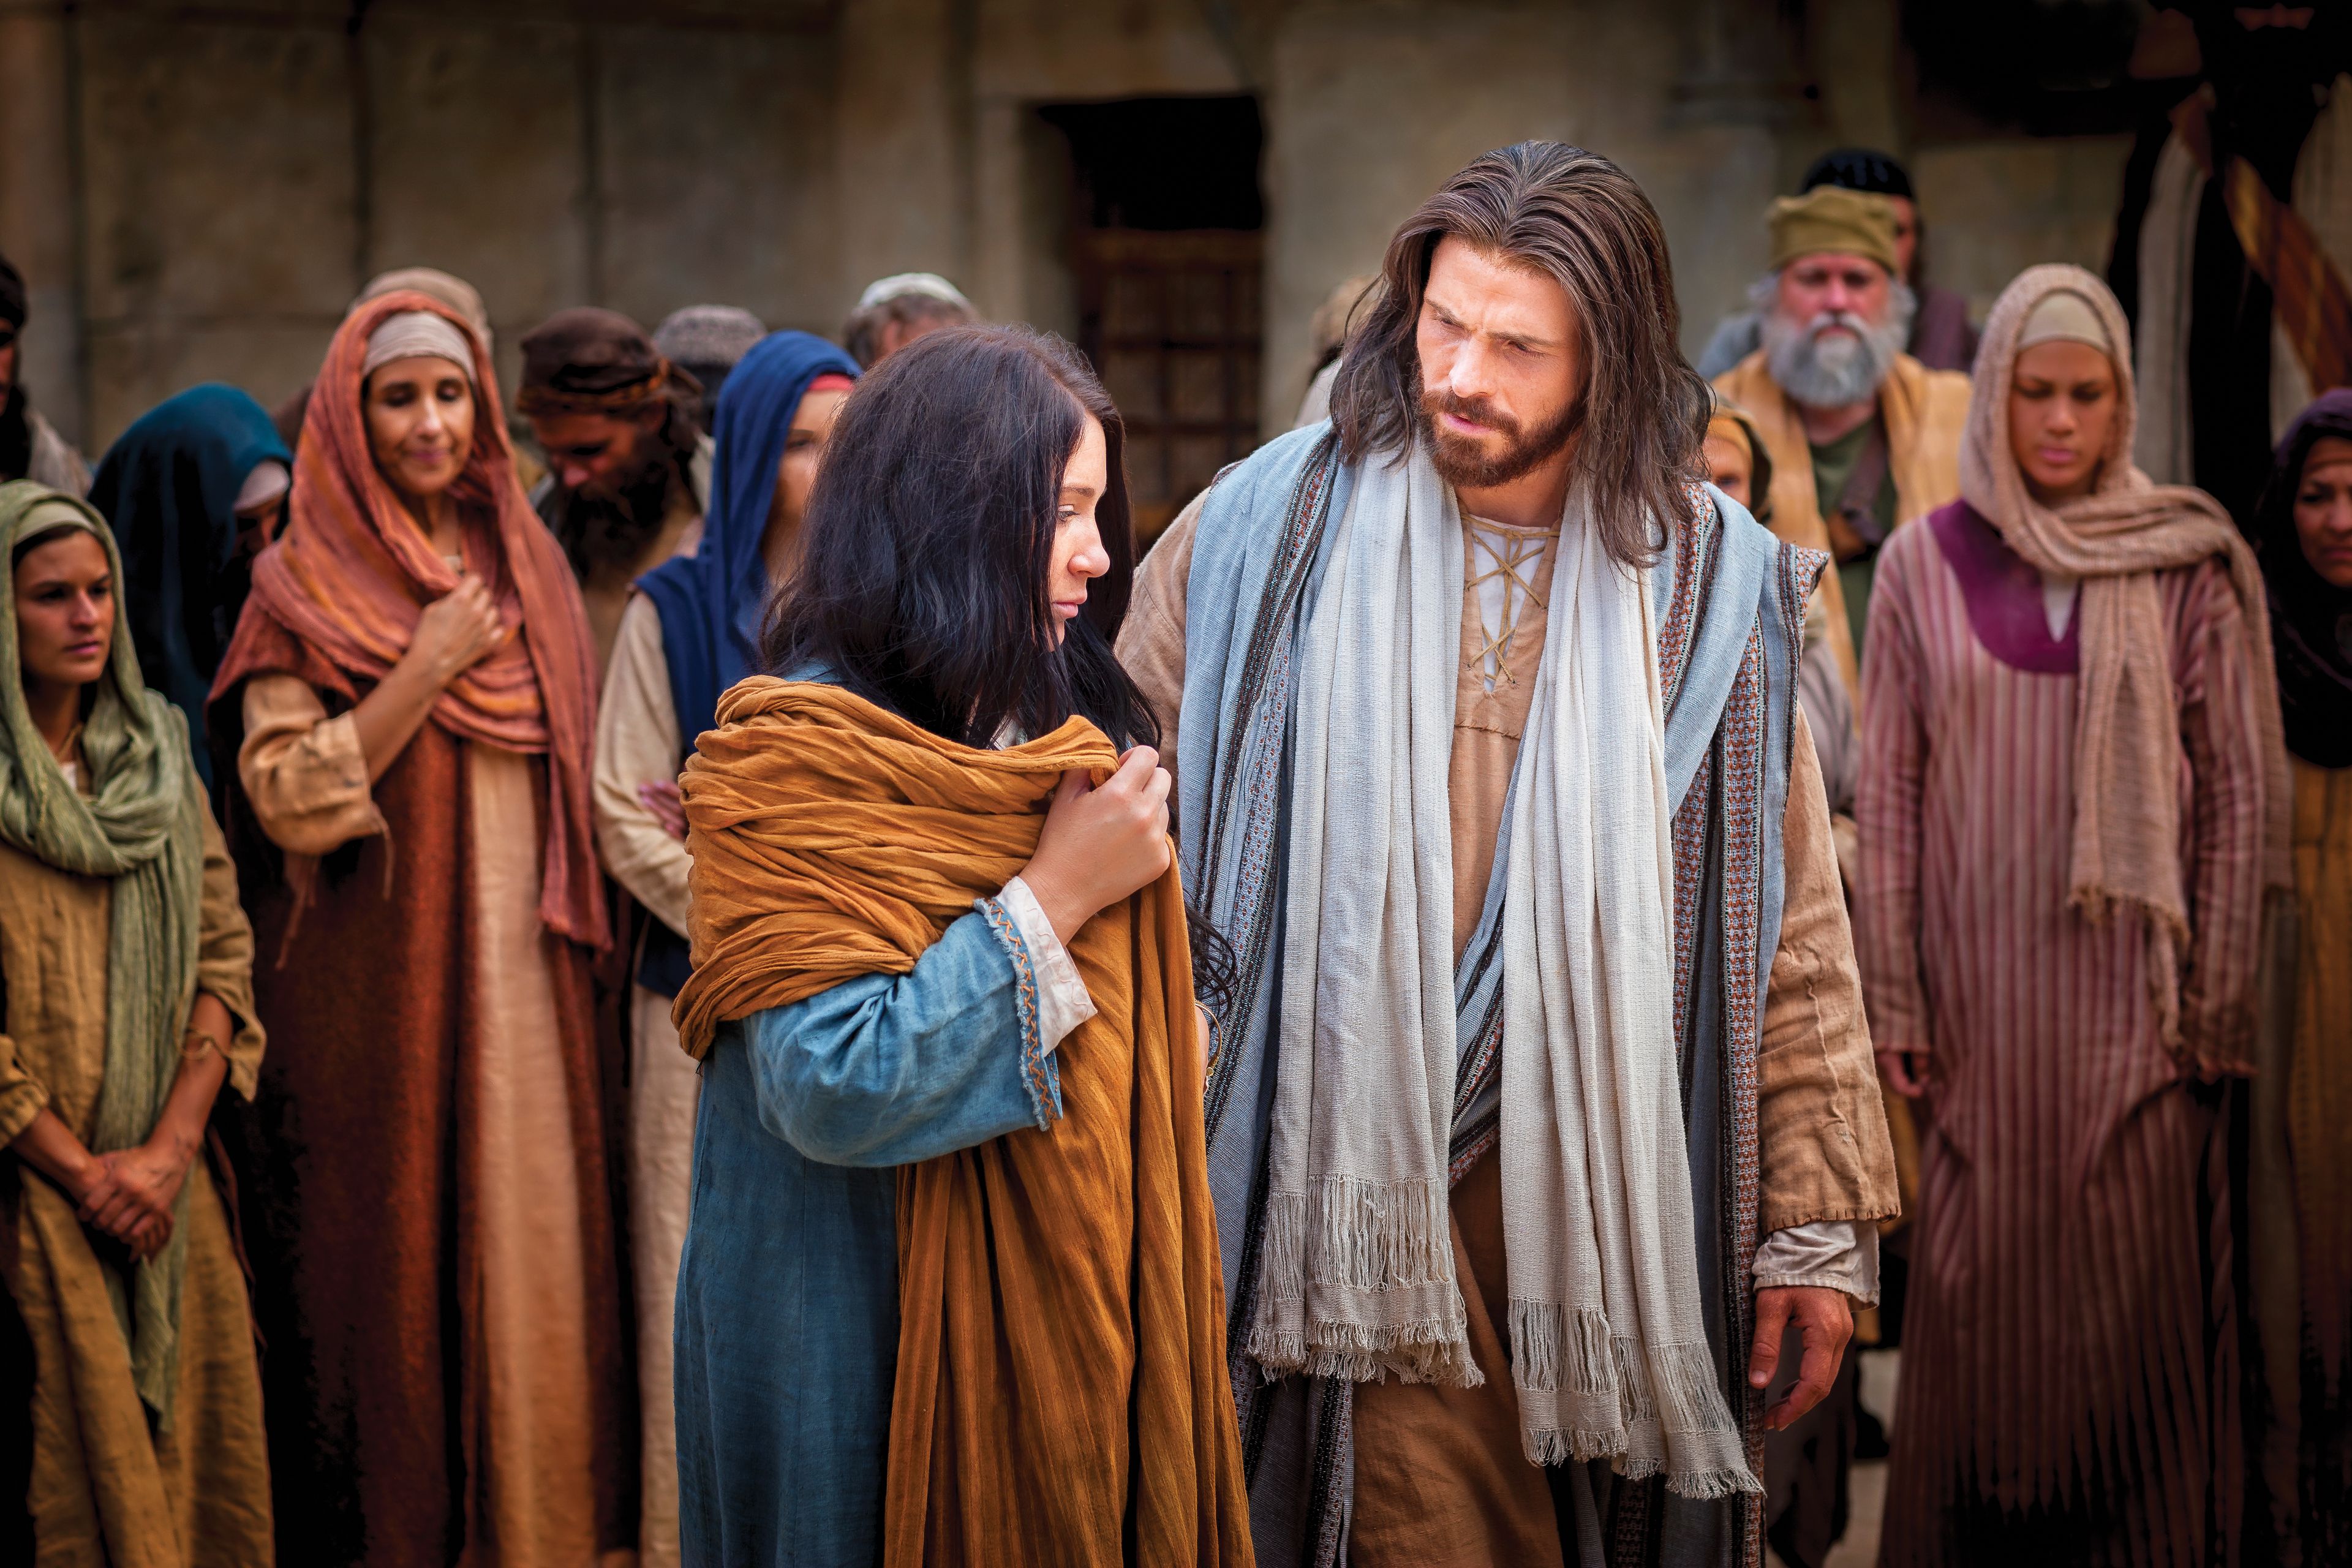 Christ standing beside the woman who was taken in adultery.